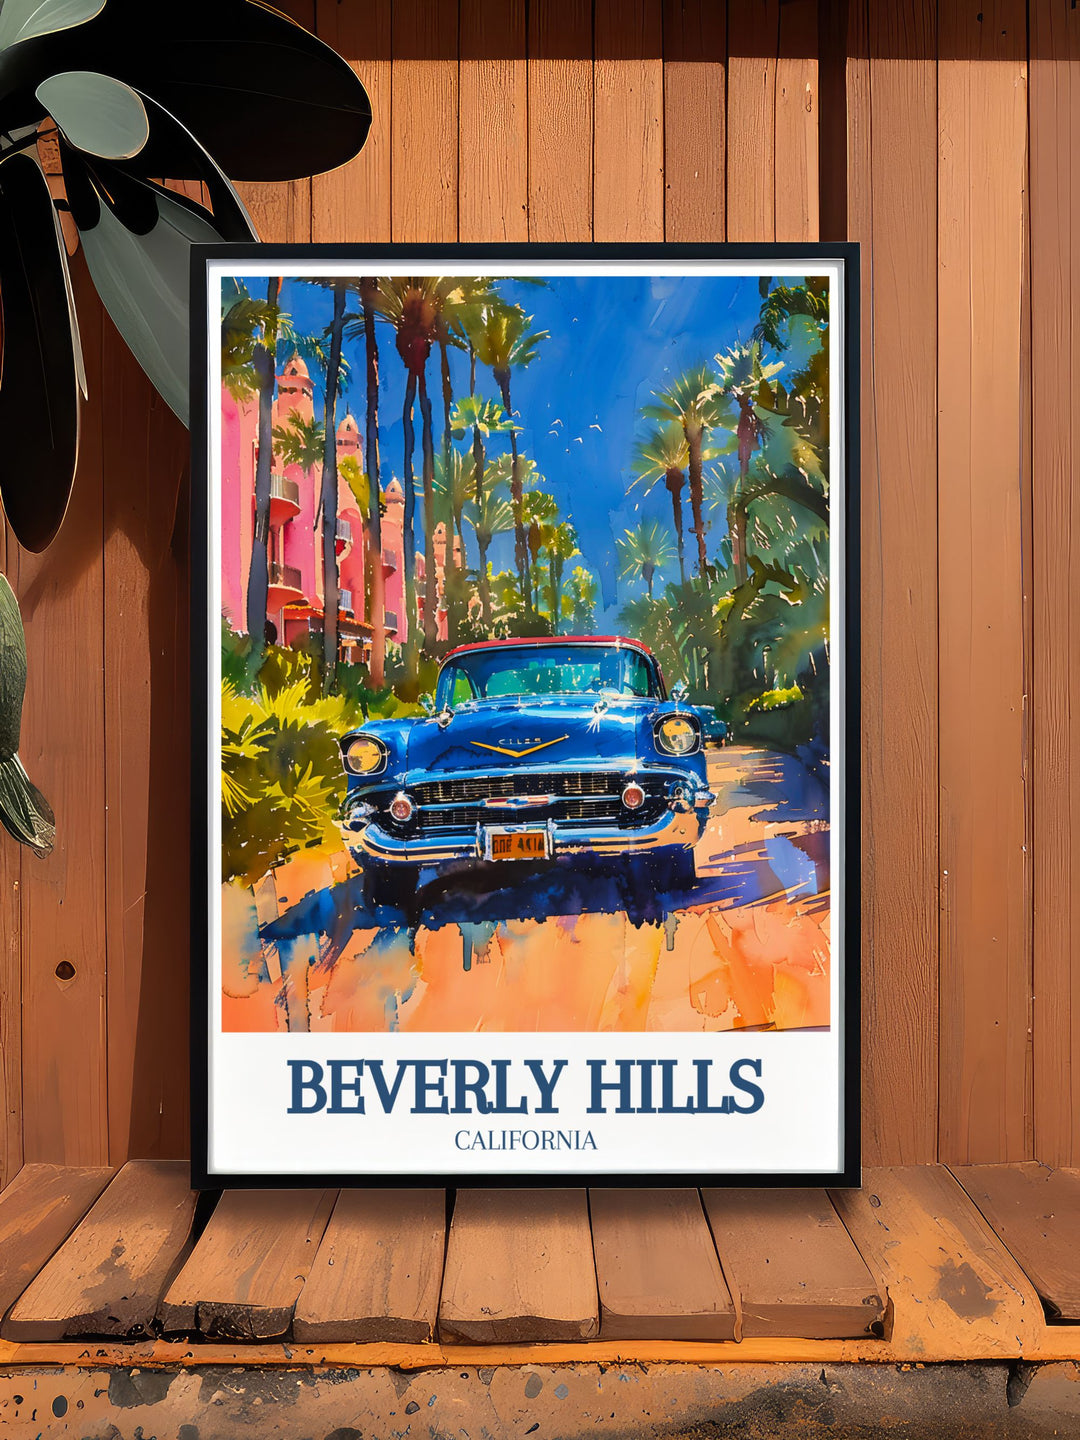 Unique artwork of Beverly Hills featuring the Beverly Hills Hotel and Hollywood, perfect for personalized gifts or home decor. This print captures the essence of Californias glamorous and scenic landmarks.